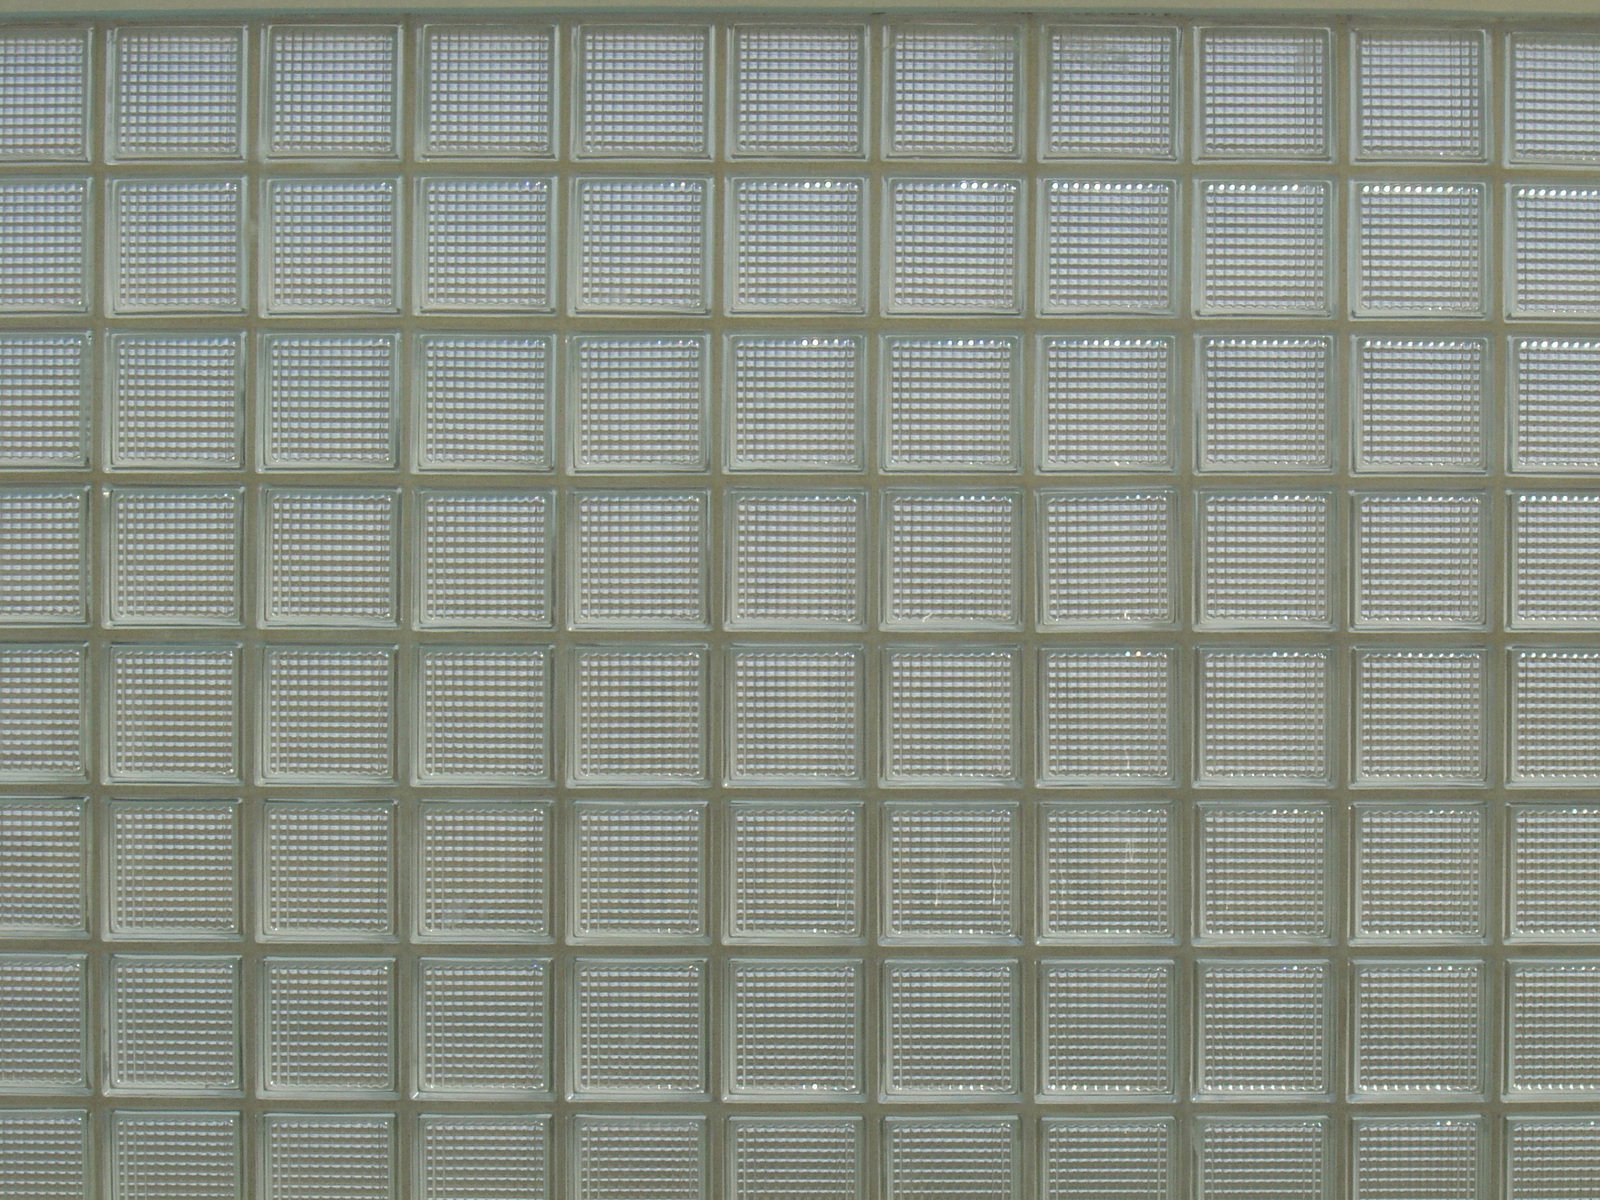 white square grid wall with no tiles or holes